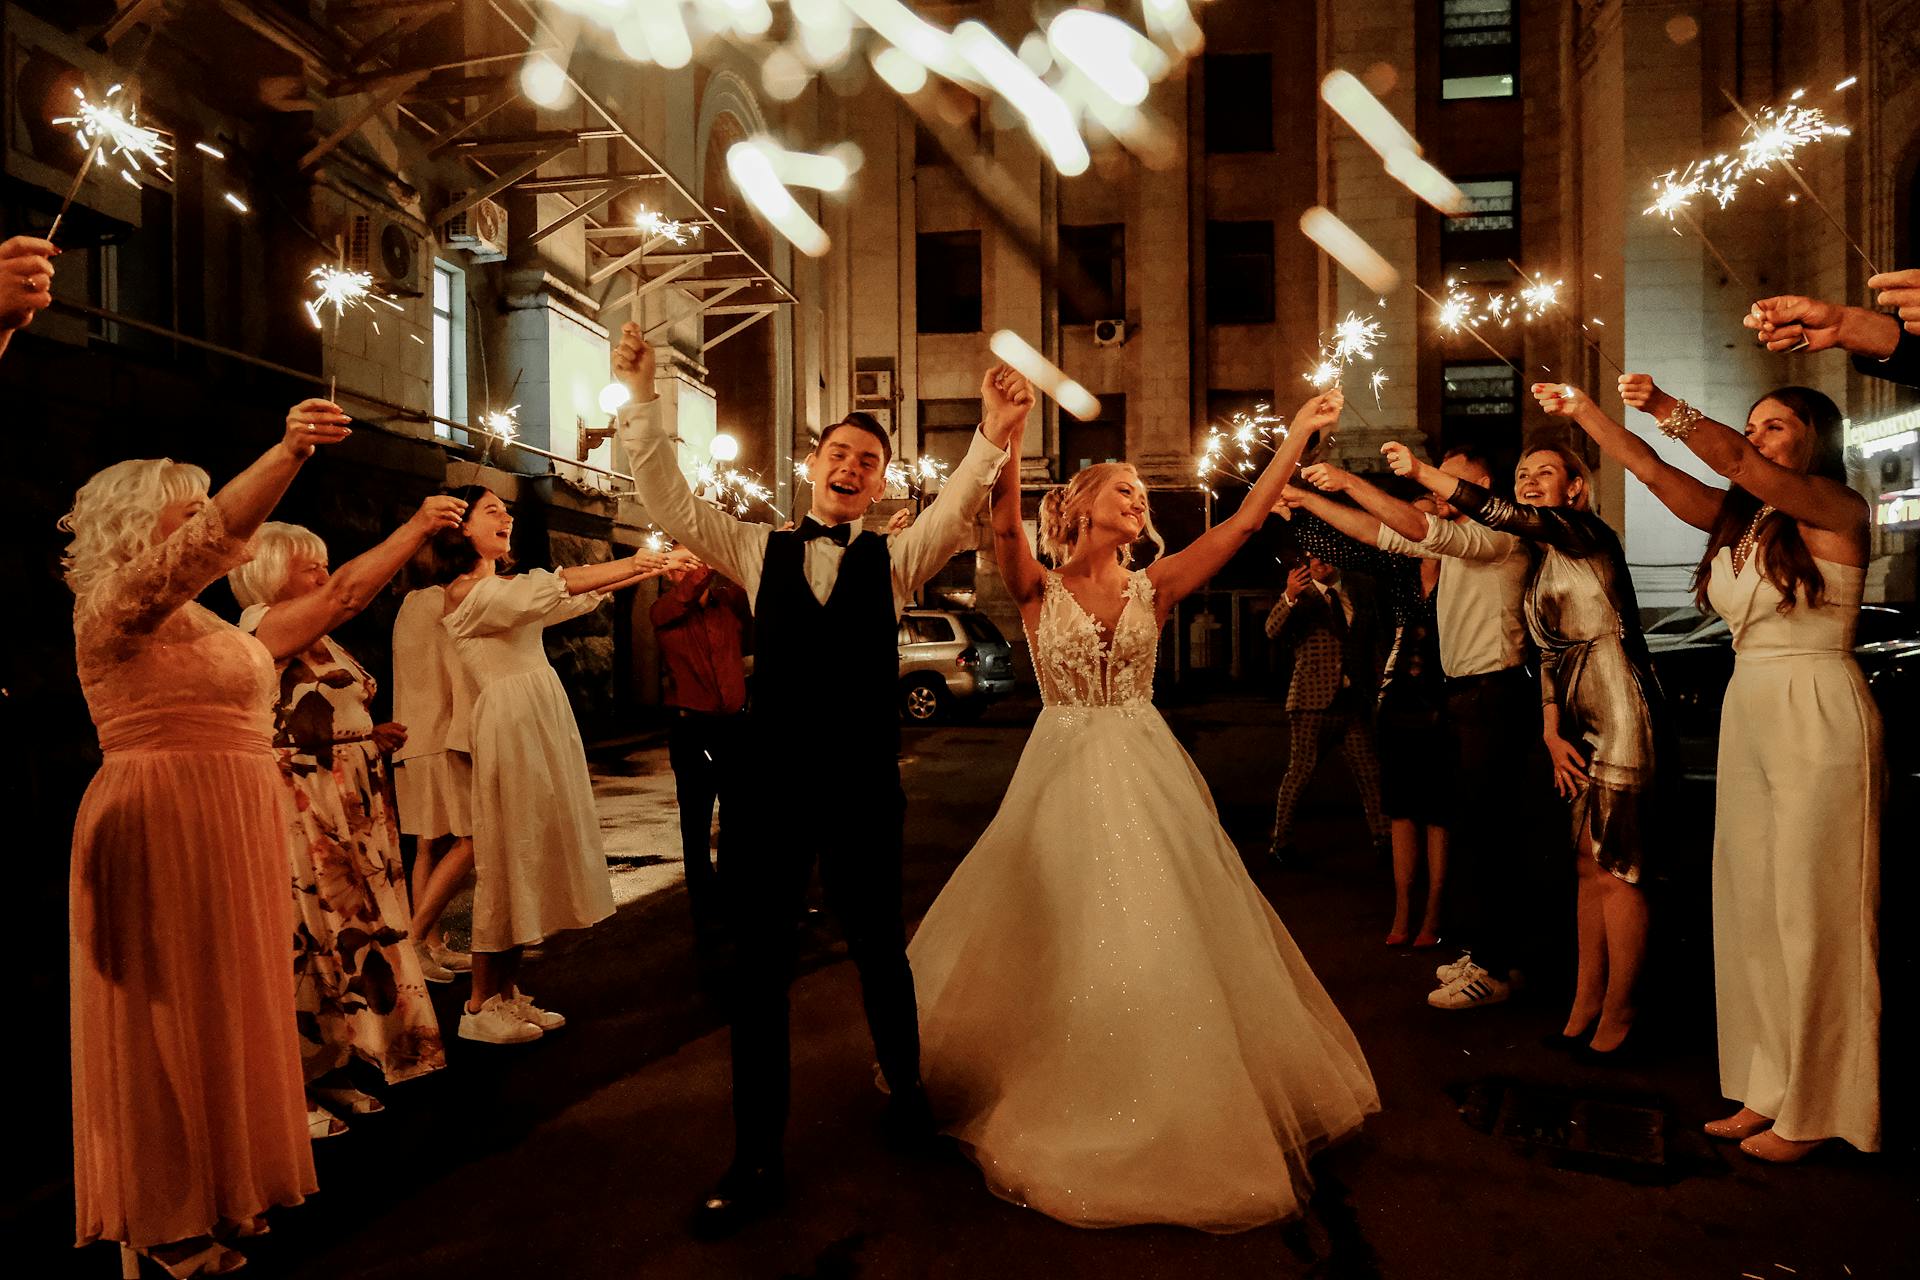 A happy couple celebrating their wedding with friends and family | Source: Pexels